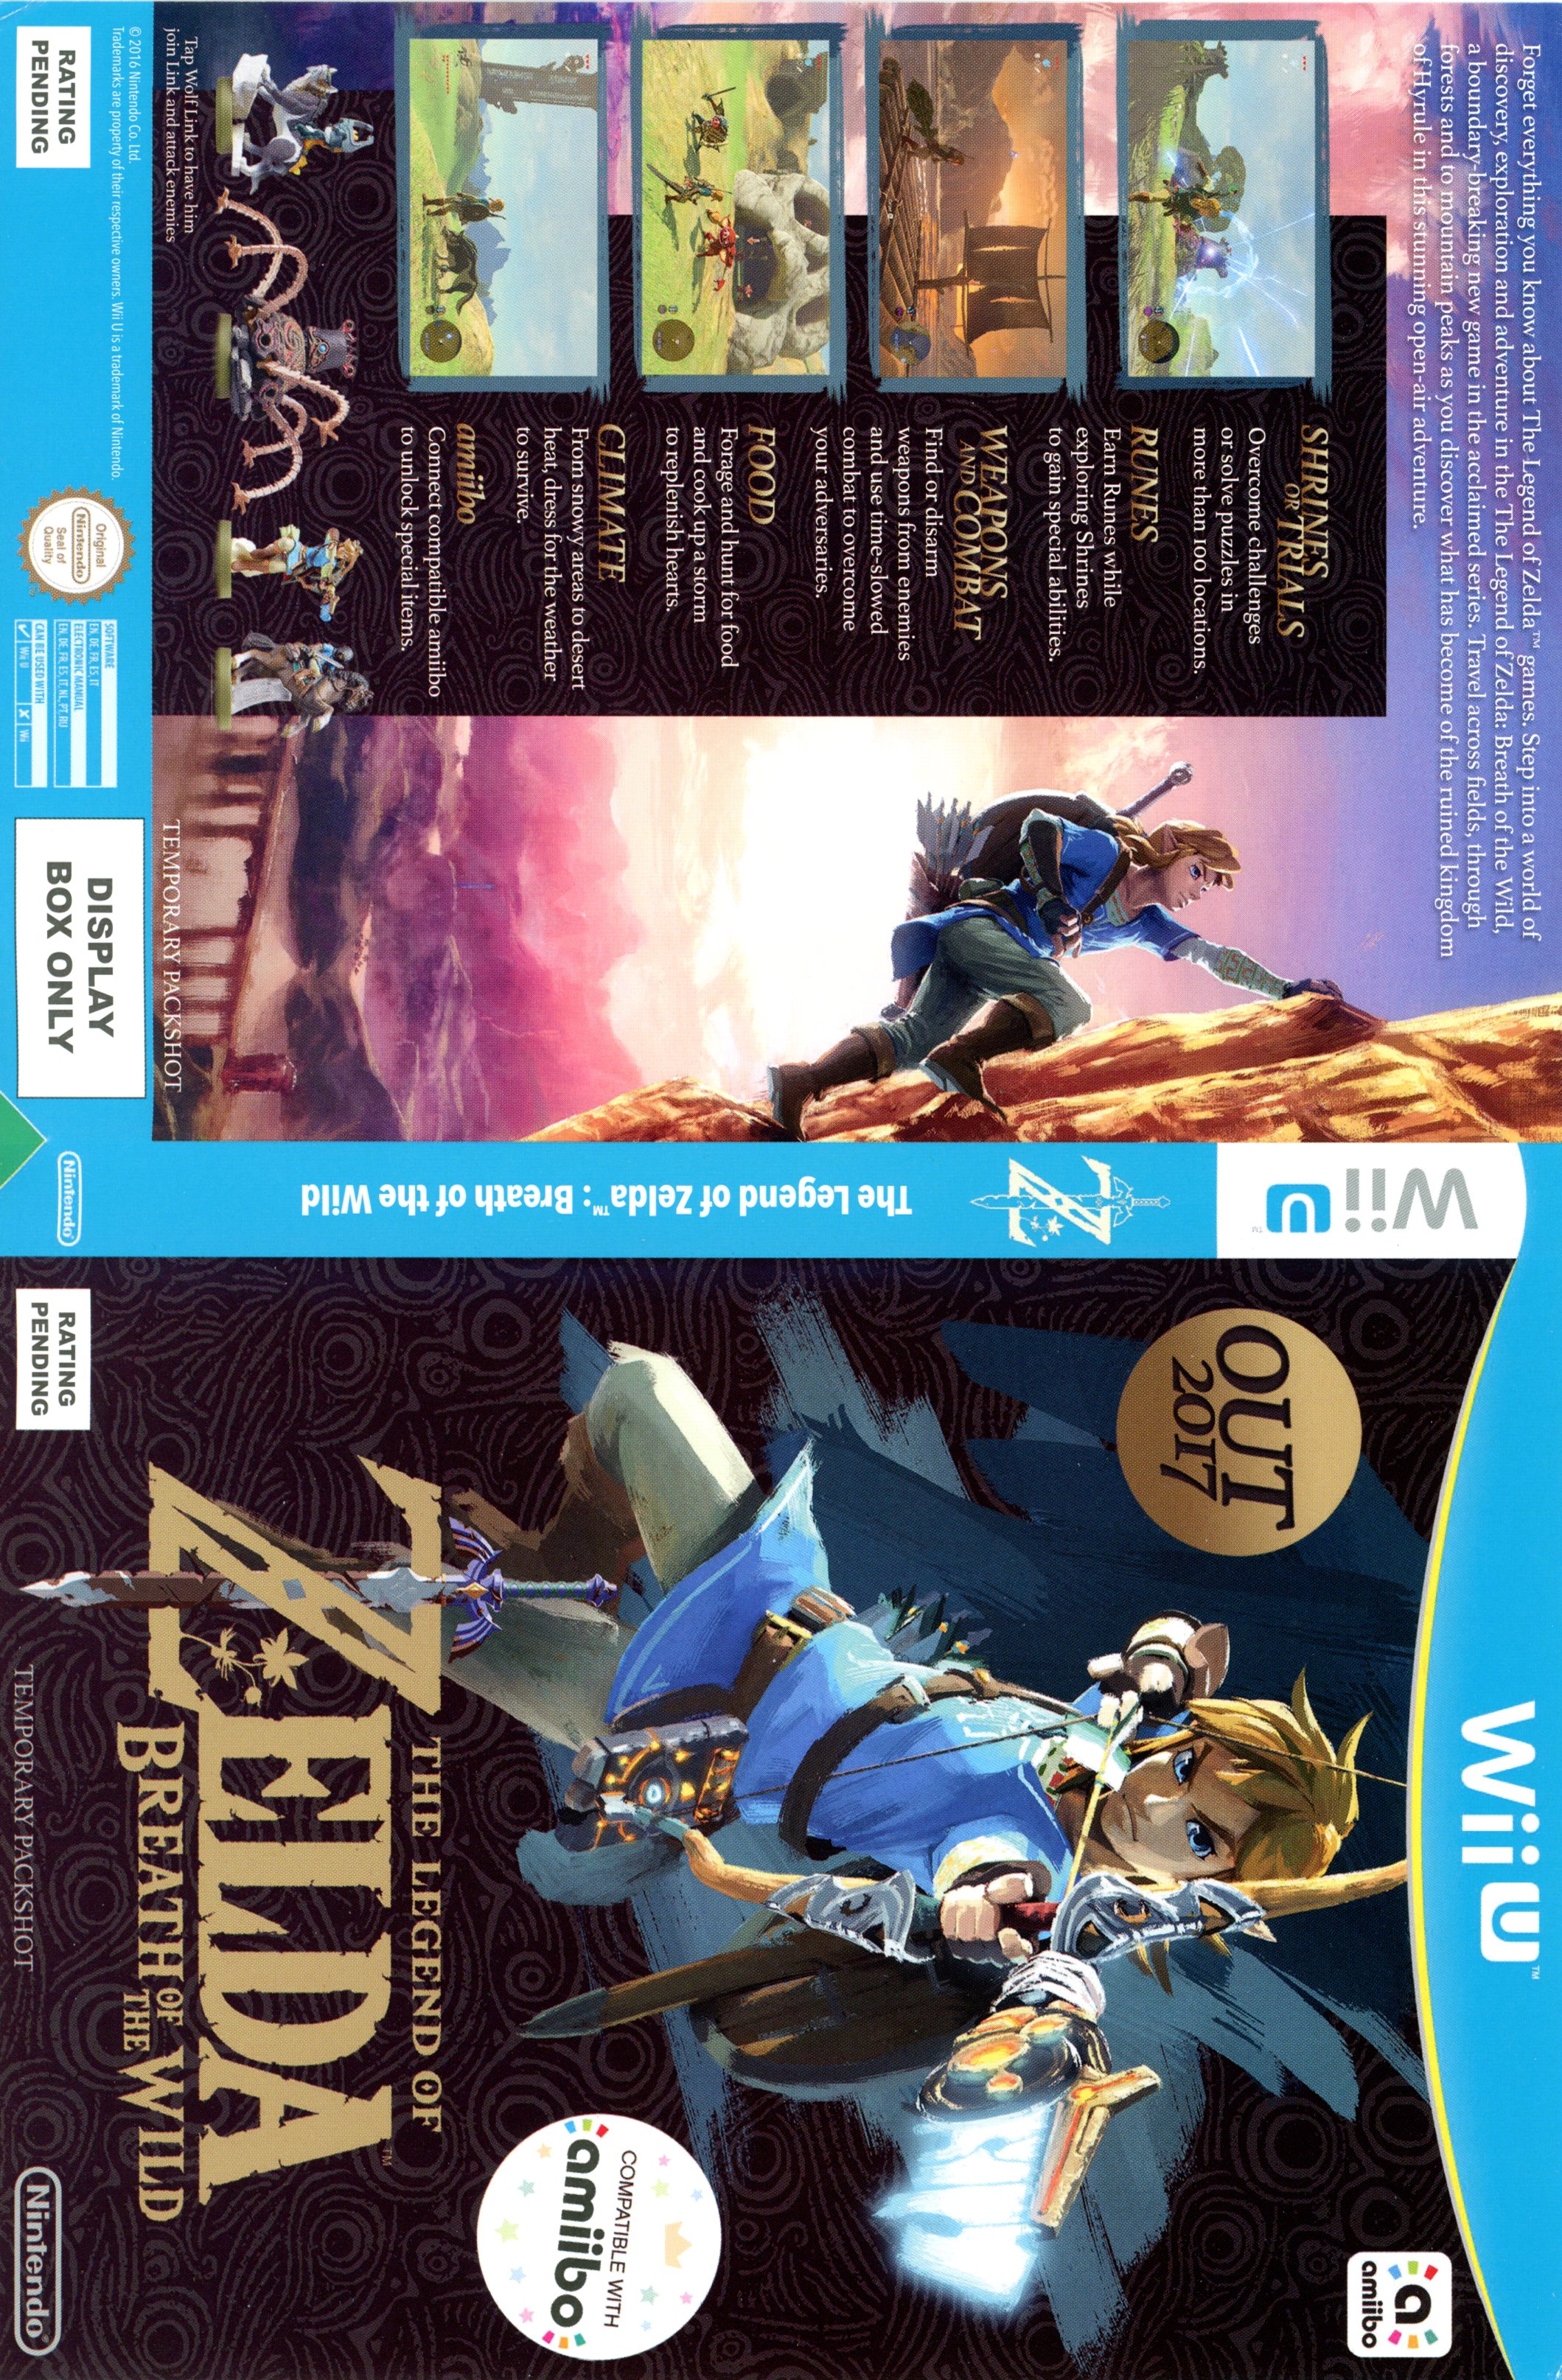 cultuur Matron Minachting Legend Of Zelda Breath Of The Wild Nintendo Wii U Display Only Box Art :  Nintendo : Free Download, Borrow, and Streaming : Internet Archive